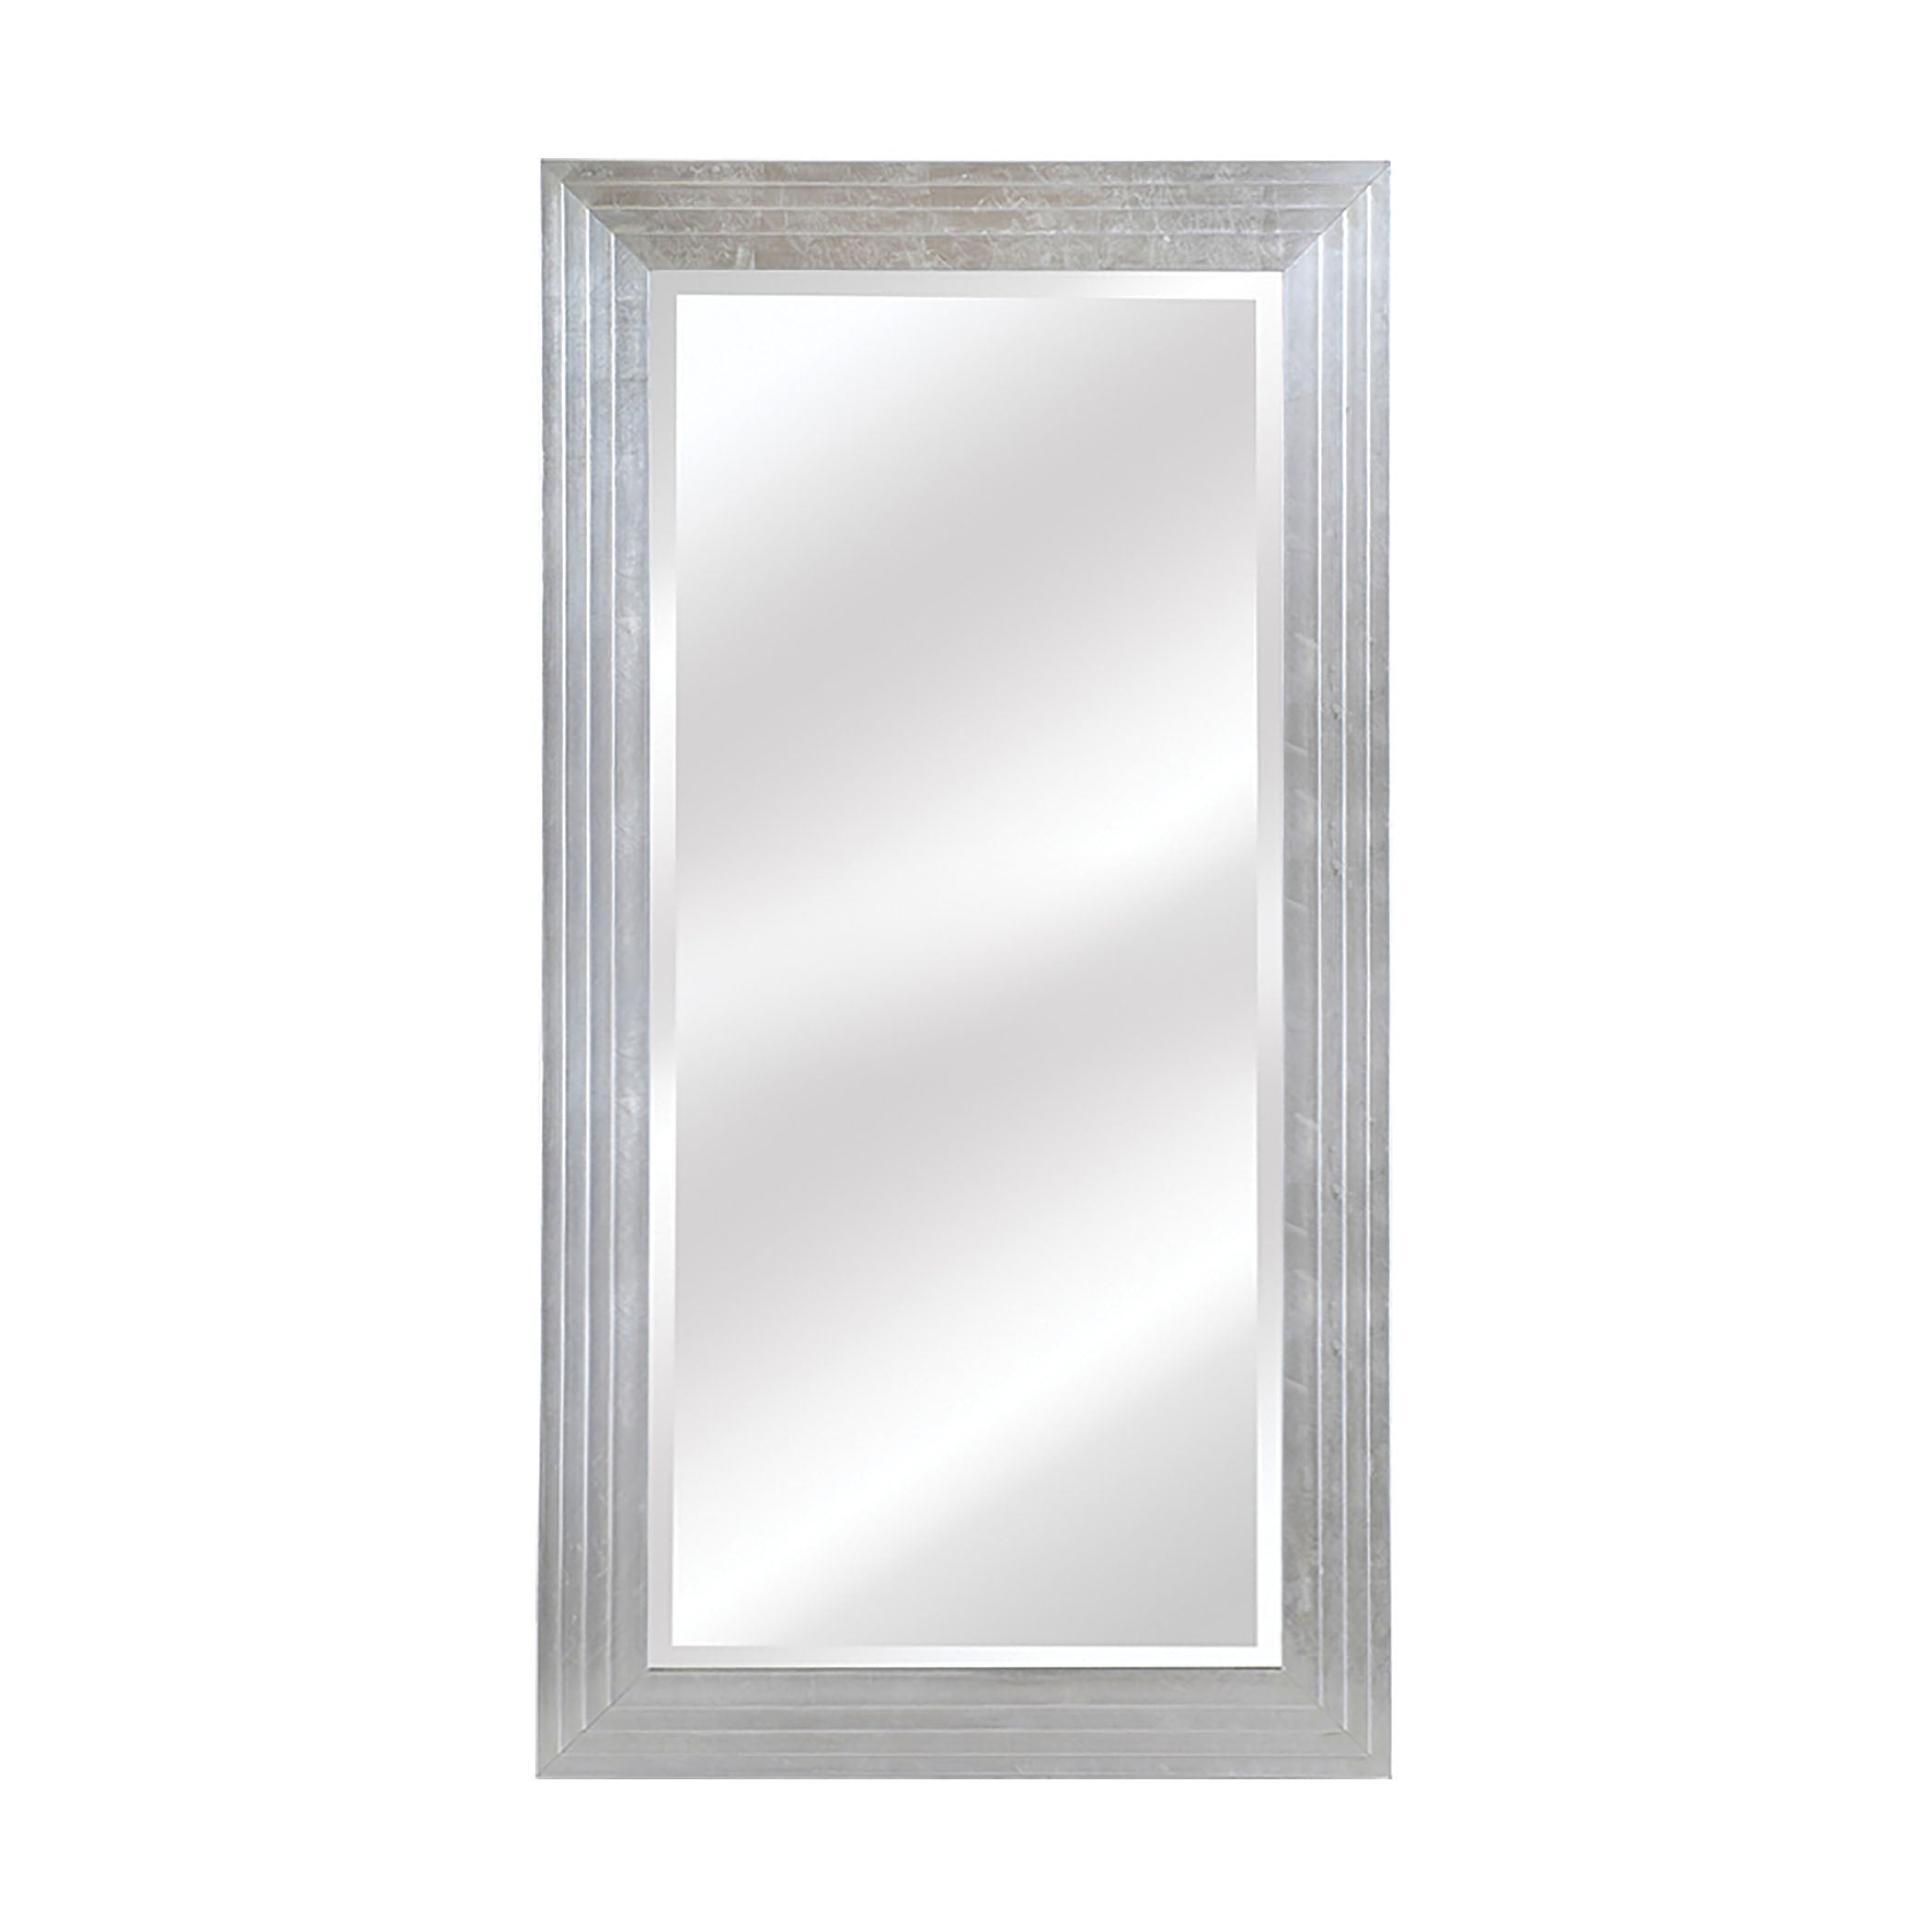 Mirror Masters Mw1110c-0051 Billings Collection Silver Leaf Finish Wall Mirror